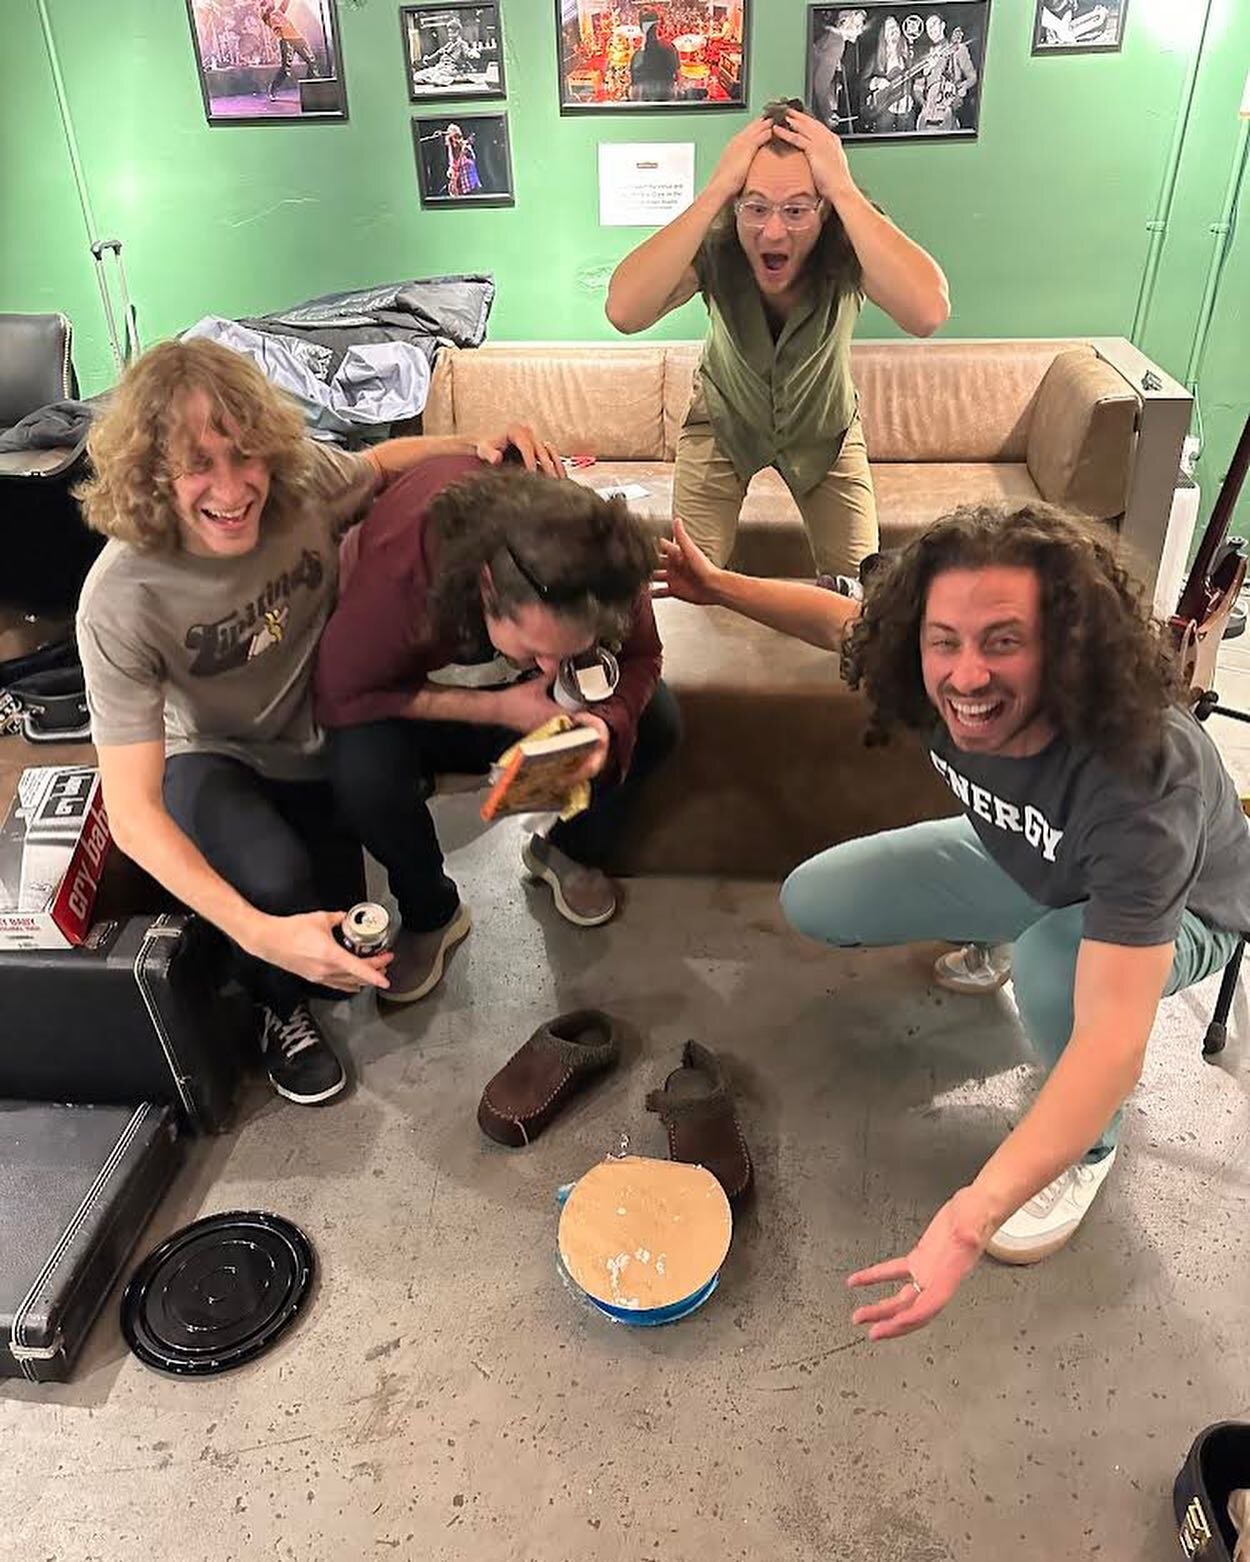 Happy Bird Day to our @first.name.bassist Ben! We hope your day's as great as this cake would've been 🙃

📷: 100% candid